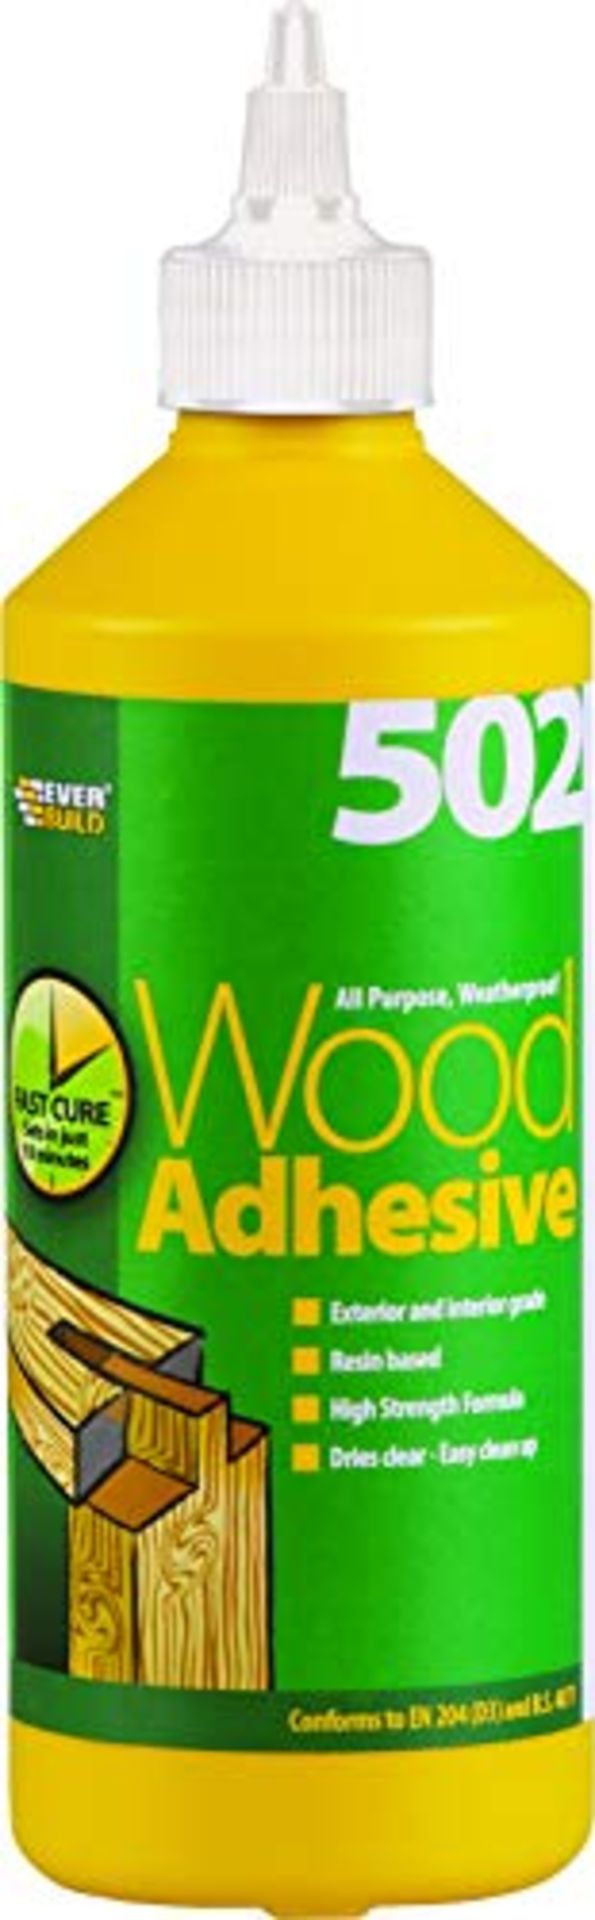 13 x Everbuild wood adhesives, as listed | RRP £ 75.41 - Image 2 of 3